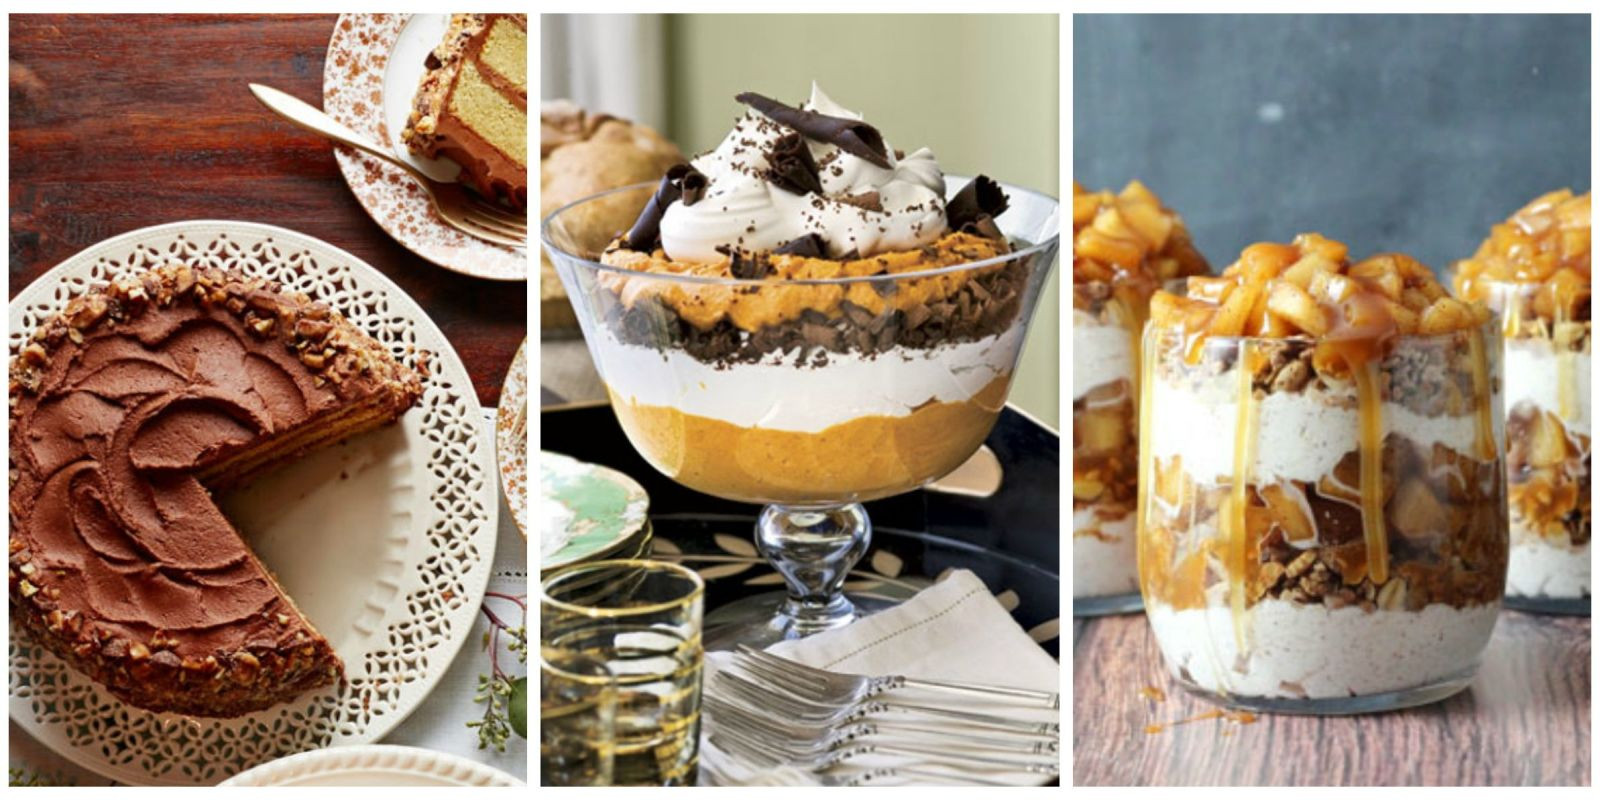 Ideas For Thanksgiving Desserts
 40 Easy Thanksgiving Desserts Recipes Best Ideas for